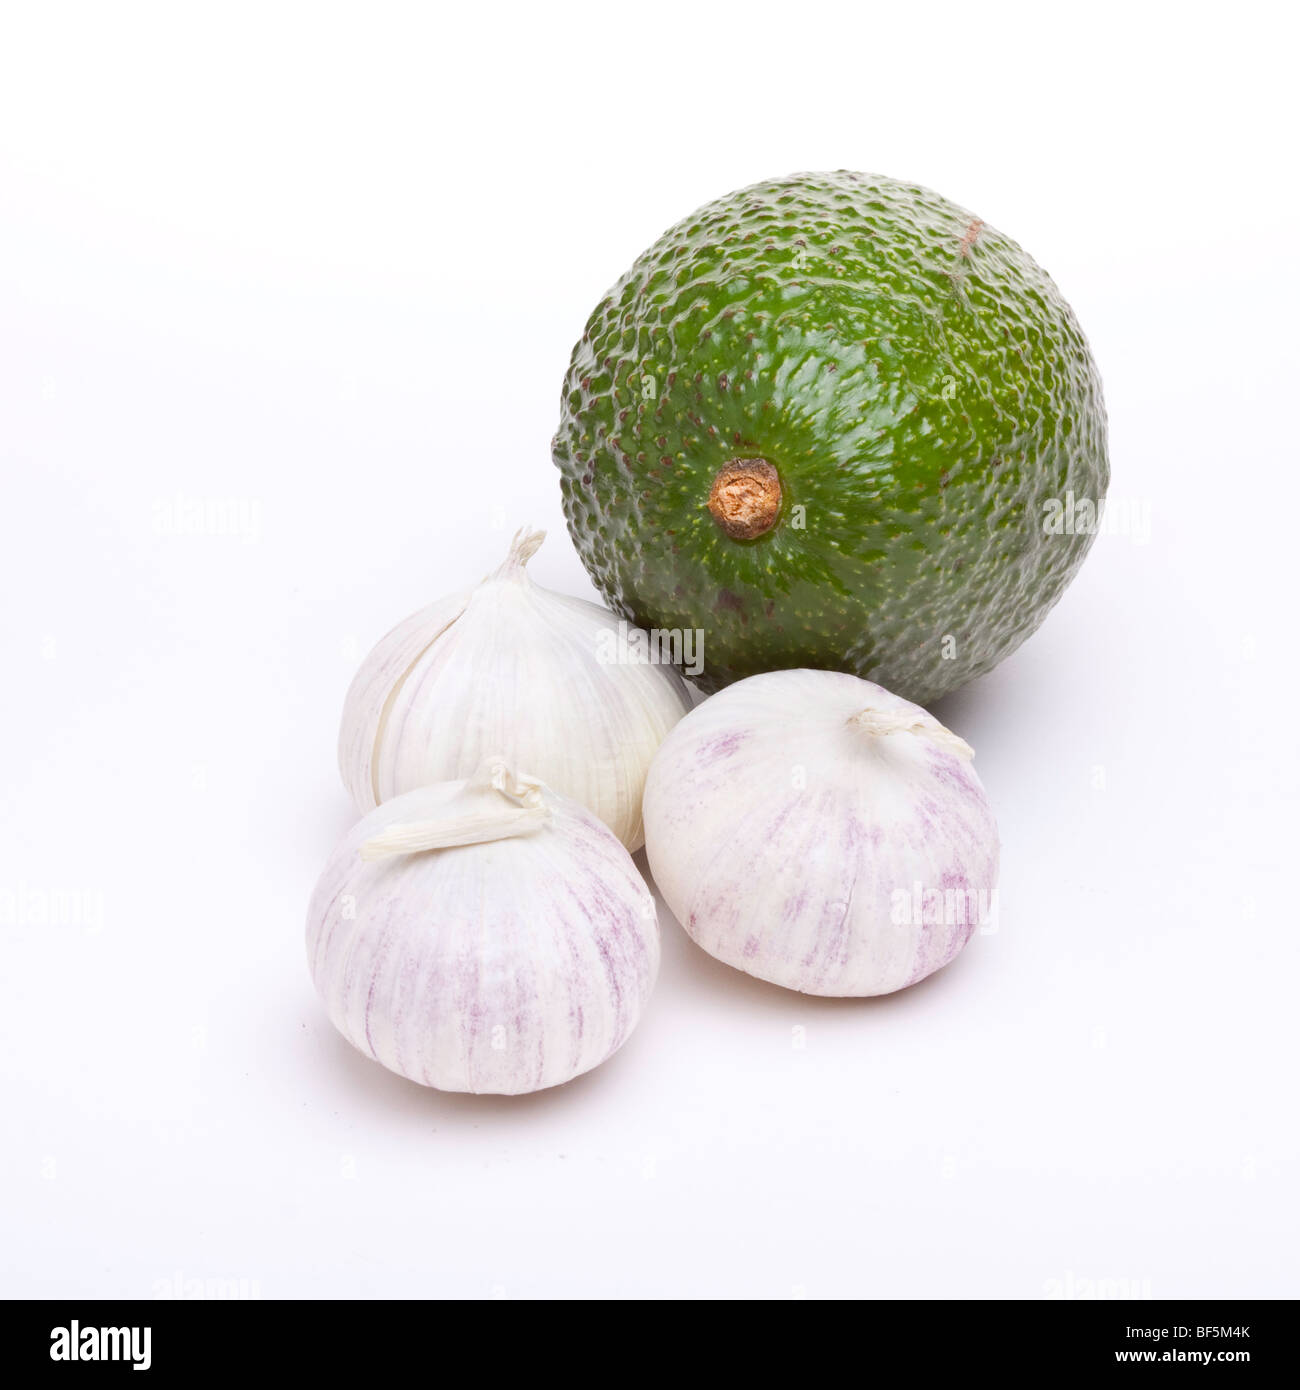 Small italian garlic bulbs and Avocado pear, the main ingredients of Guacamole. Isolated against white background. Stock Photo